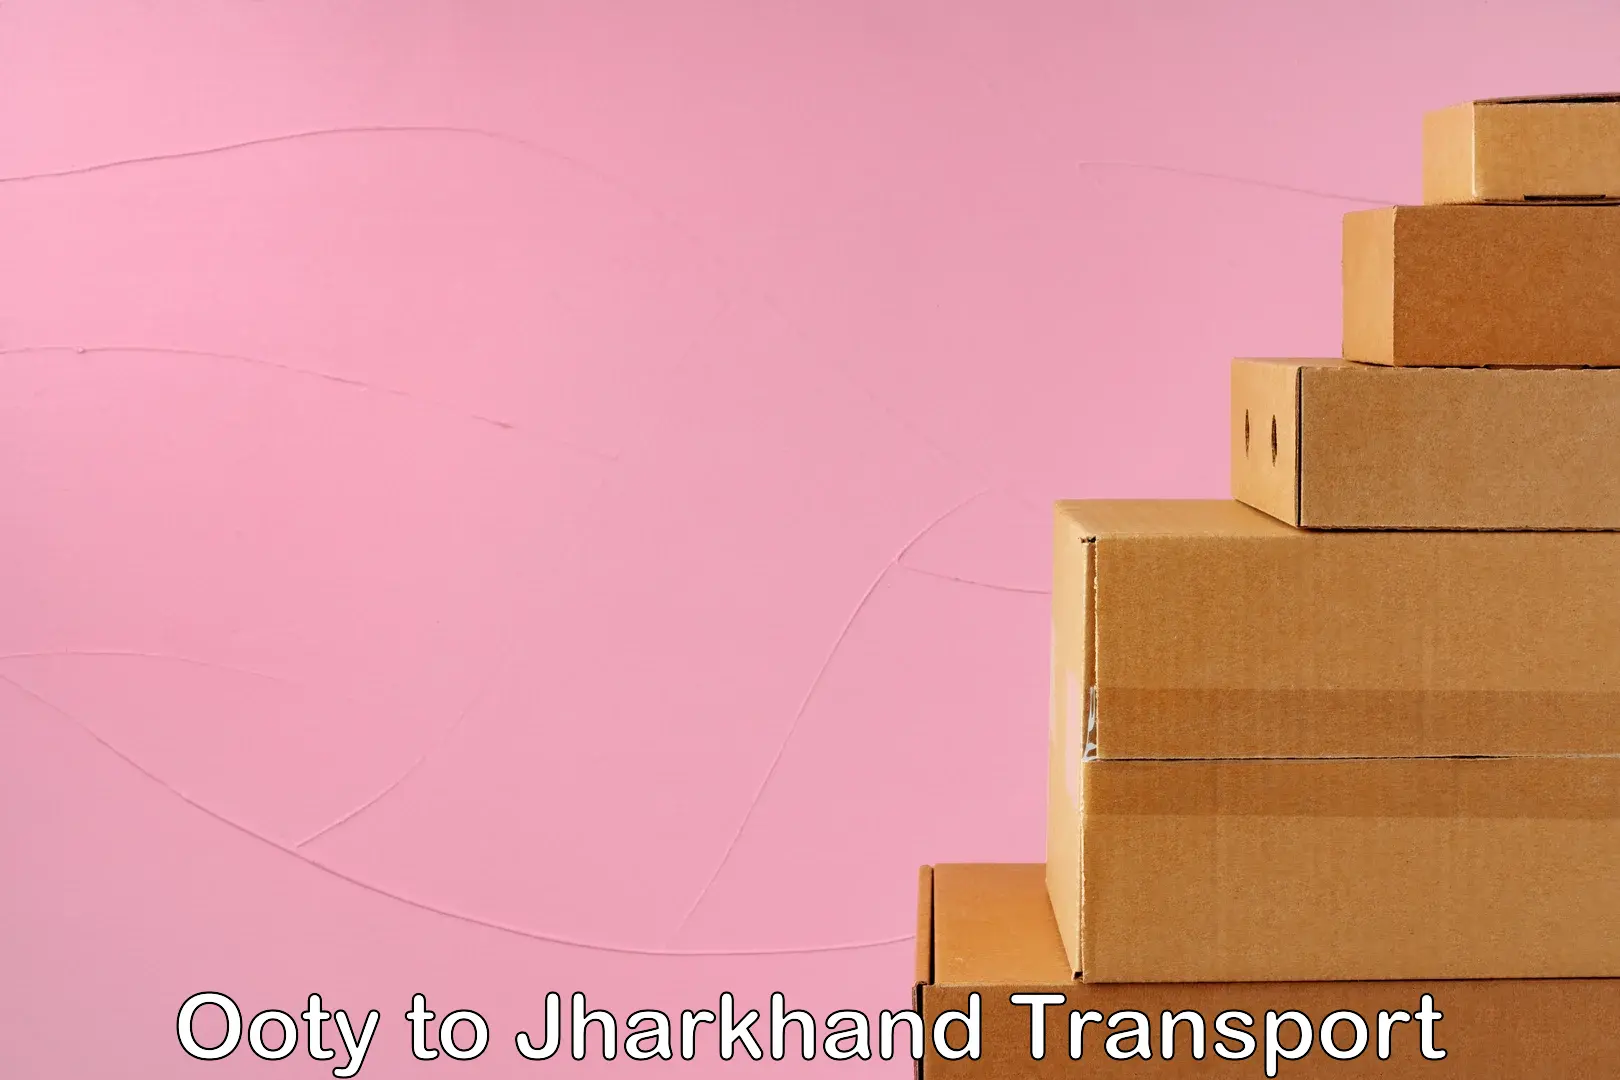 Shipping partner Ooty to Jharkhand